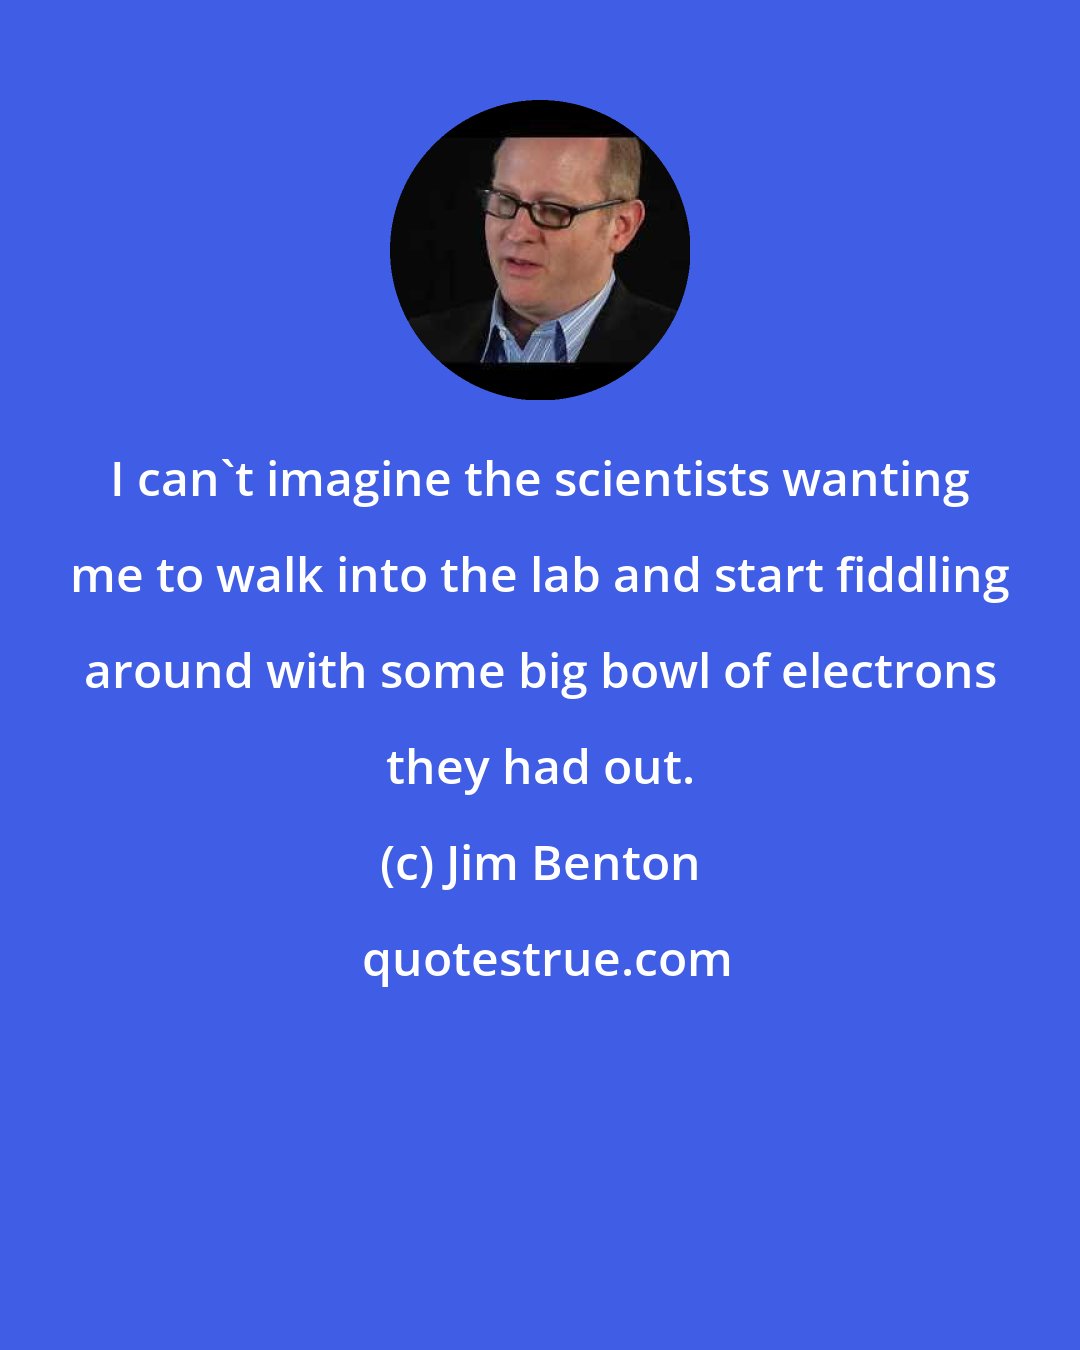 Jim Benton: I can't imagine the scientists wanting me to walk into the lab and start fiddling around with some big bowl of electrons they had out.